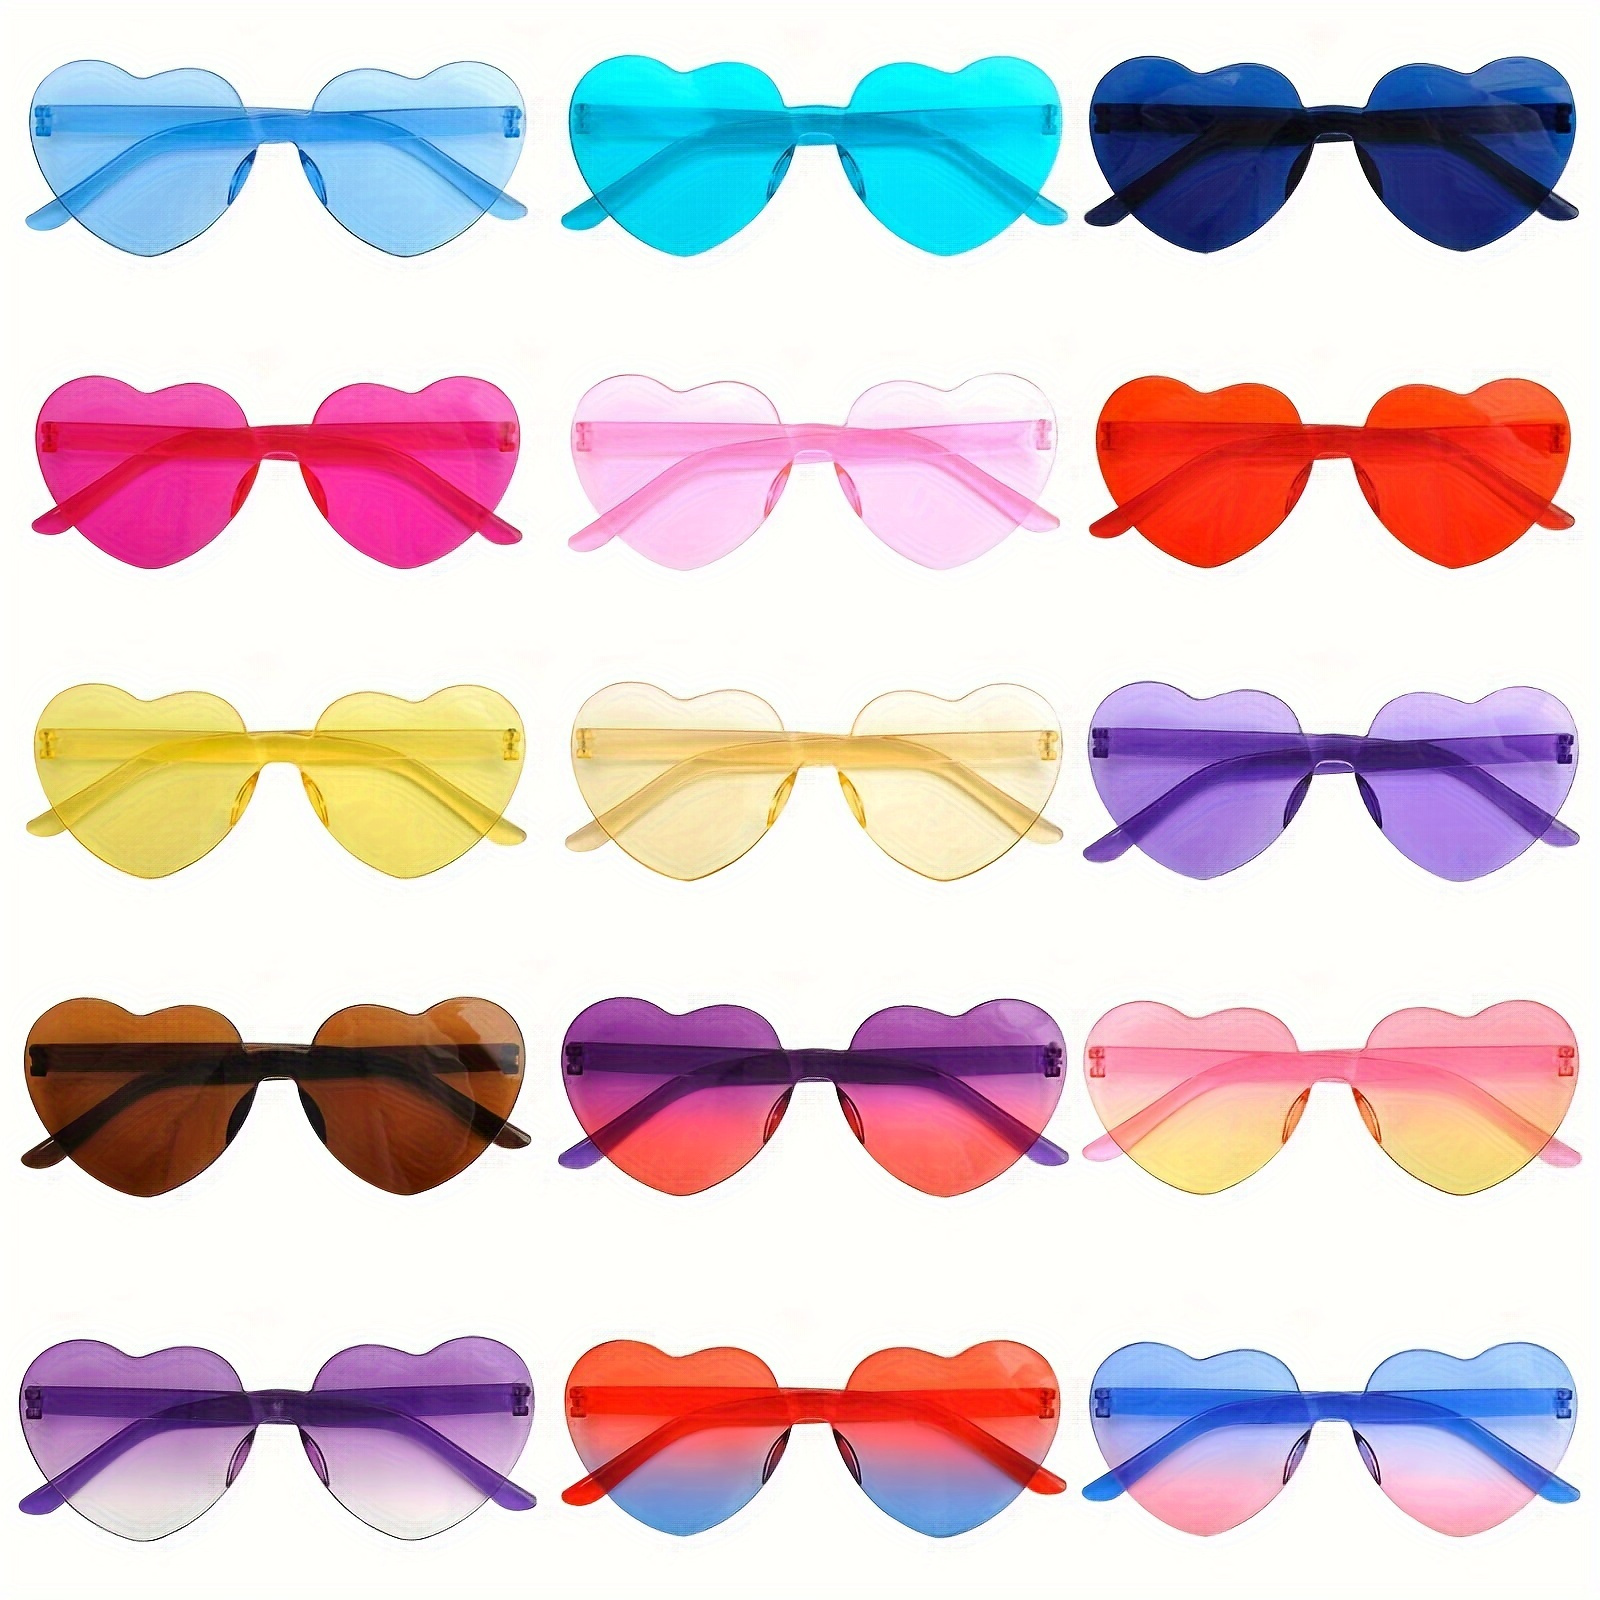 

15-piece Cute Heart-shaped Fashion Glasses In Vibrant Colors - Perfect For Rave Parties & Clubbing, Unisex